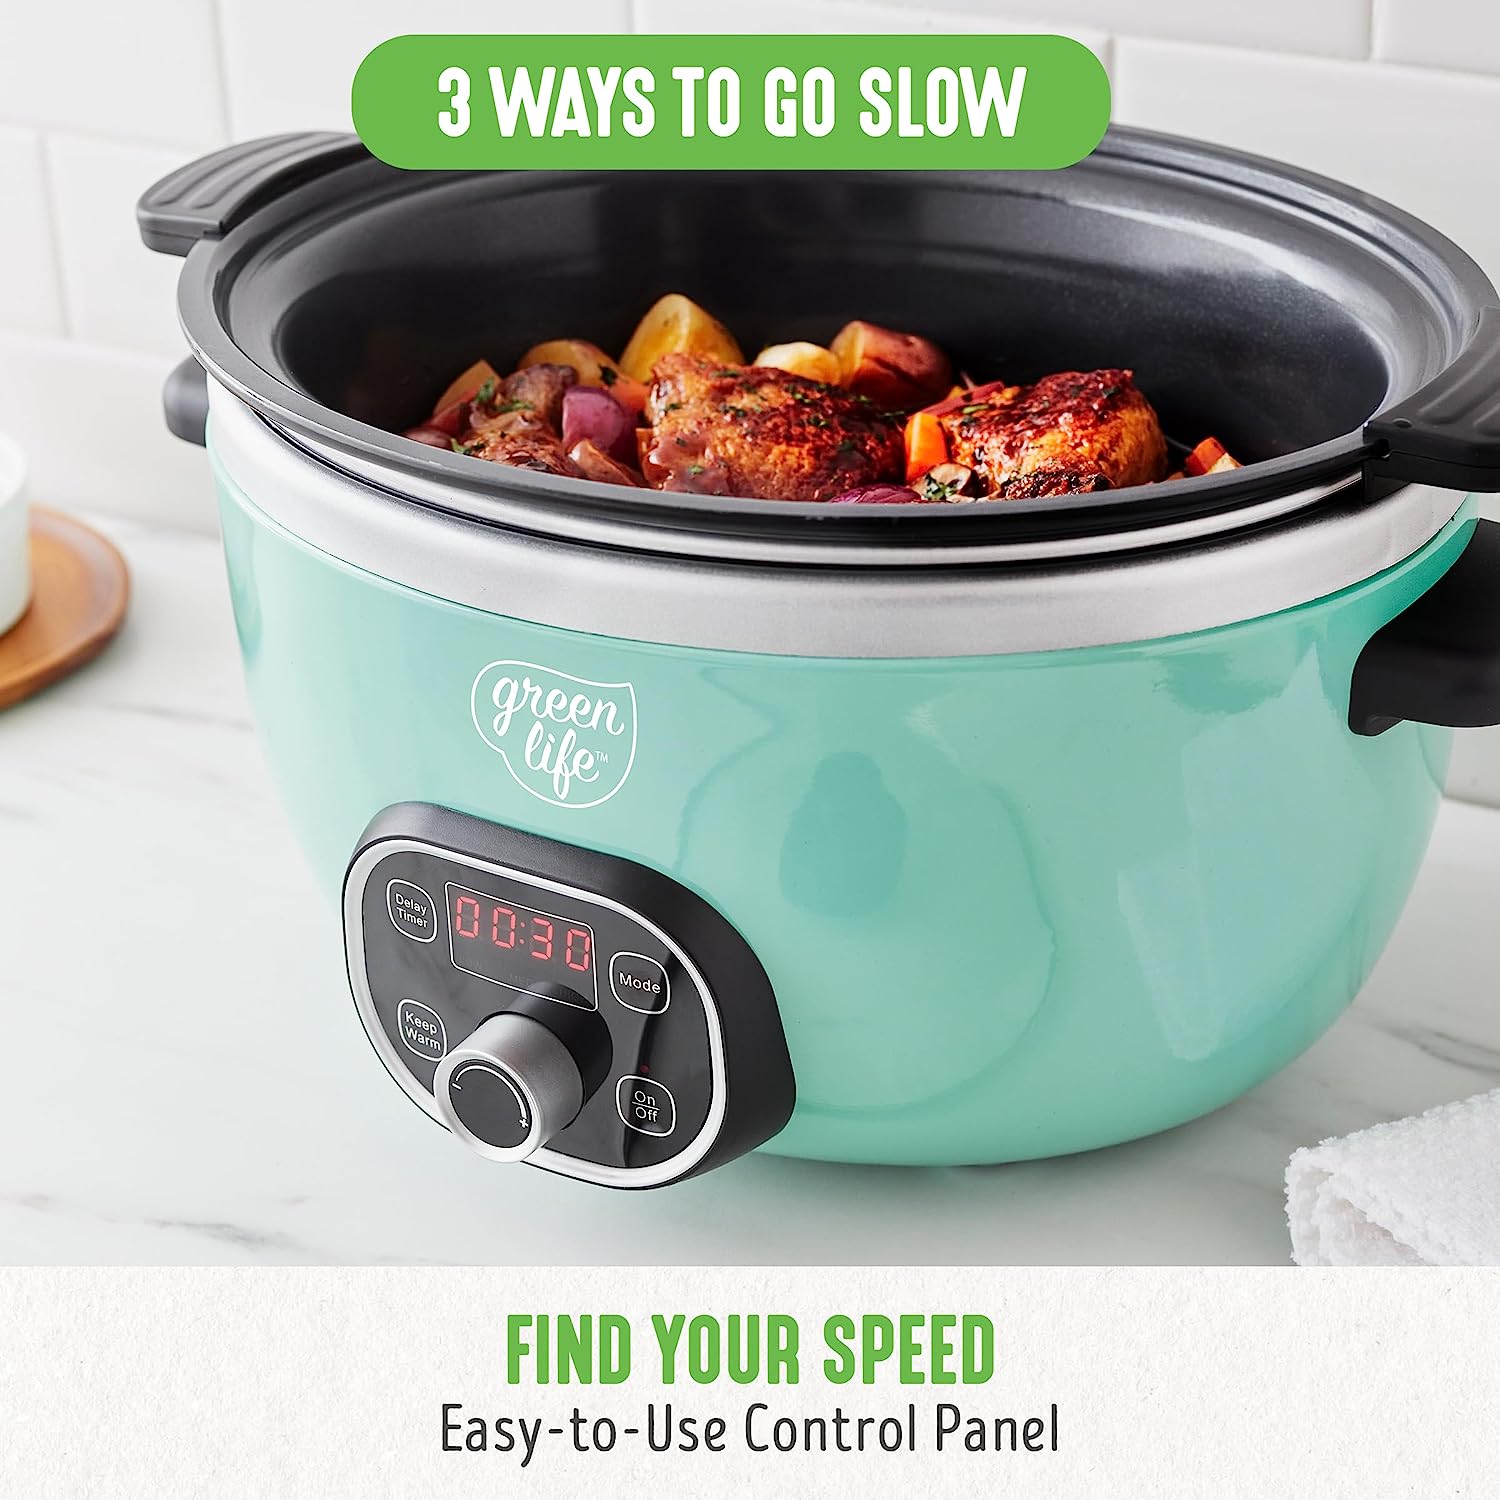 https://bigbigmart.com/wp-content/uploads/2023/07/GreenLife-Cook-Duo-Healthy-Ceramic-Nonstick-Programmable-6-Quart-Family-Sized-Slow-Cooker-PFAS-Free-Removable-Lid-and-Pot-Digital-Timer-Dishwasher-Safe-Parts-Turquoise7.jpg